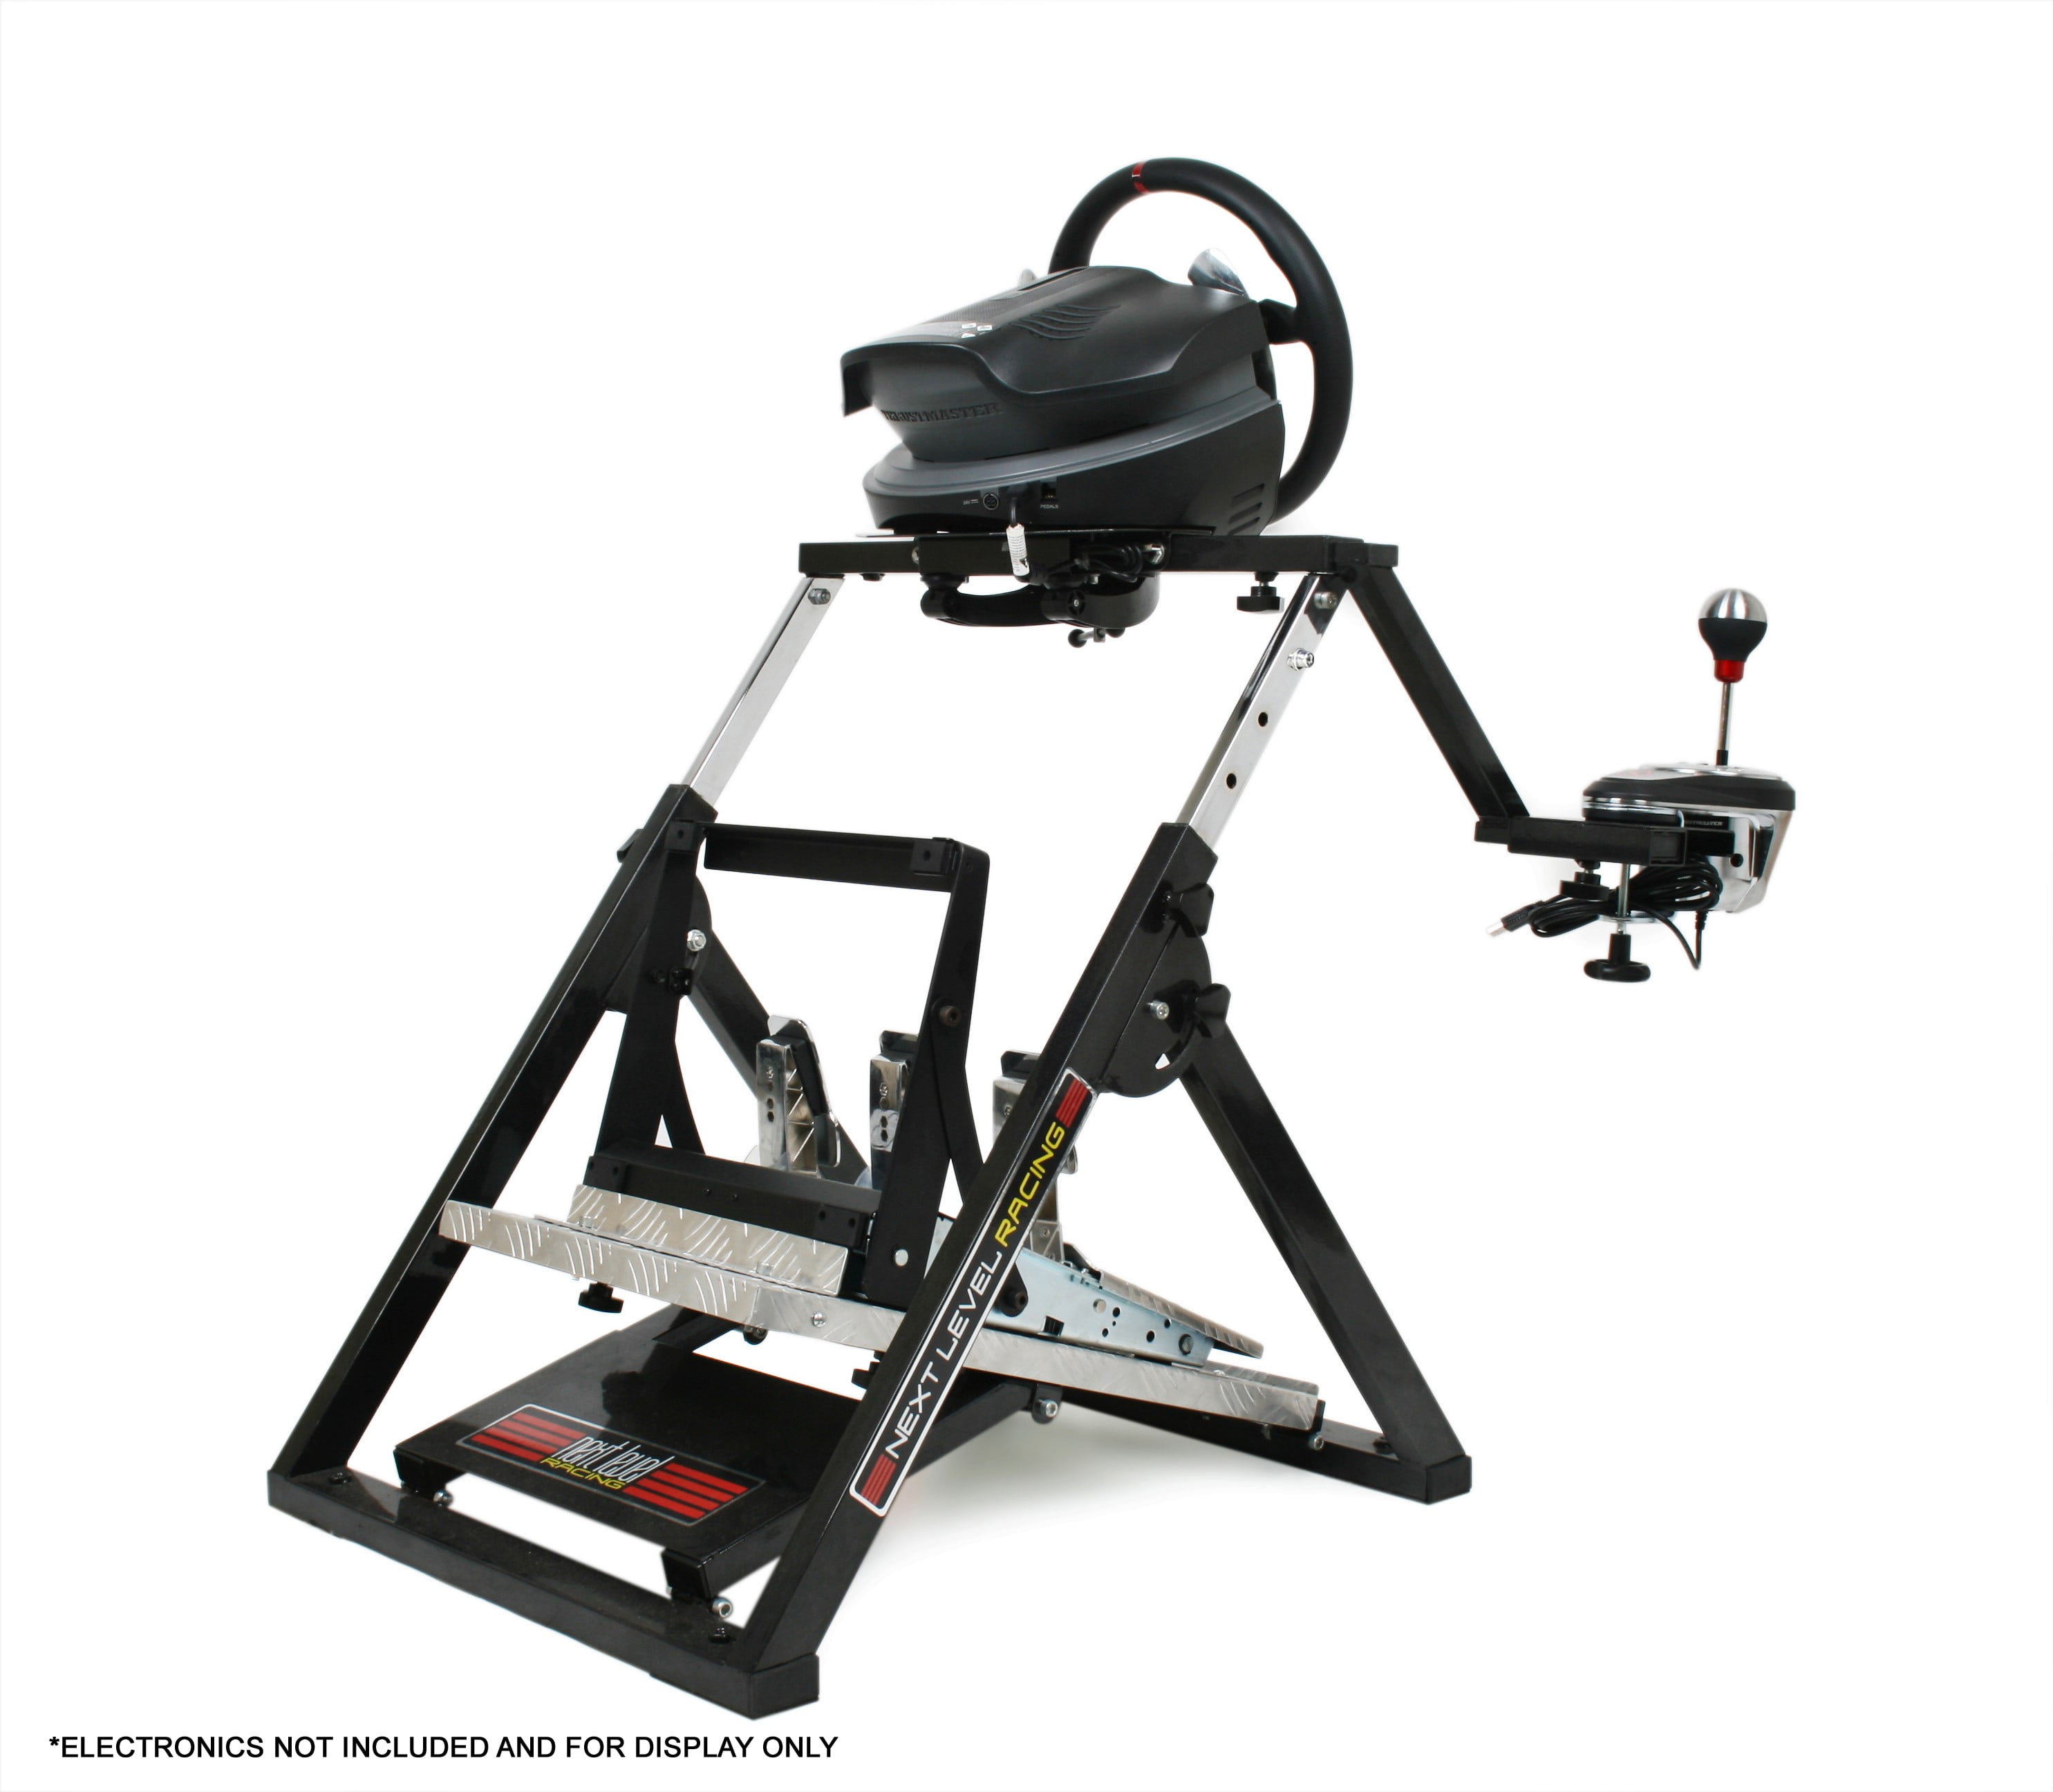 Driving wheel stand